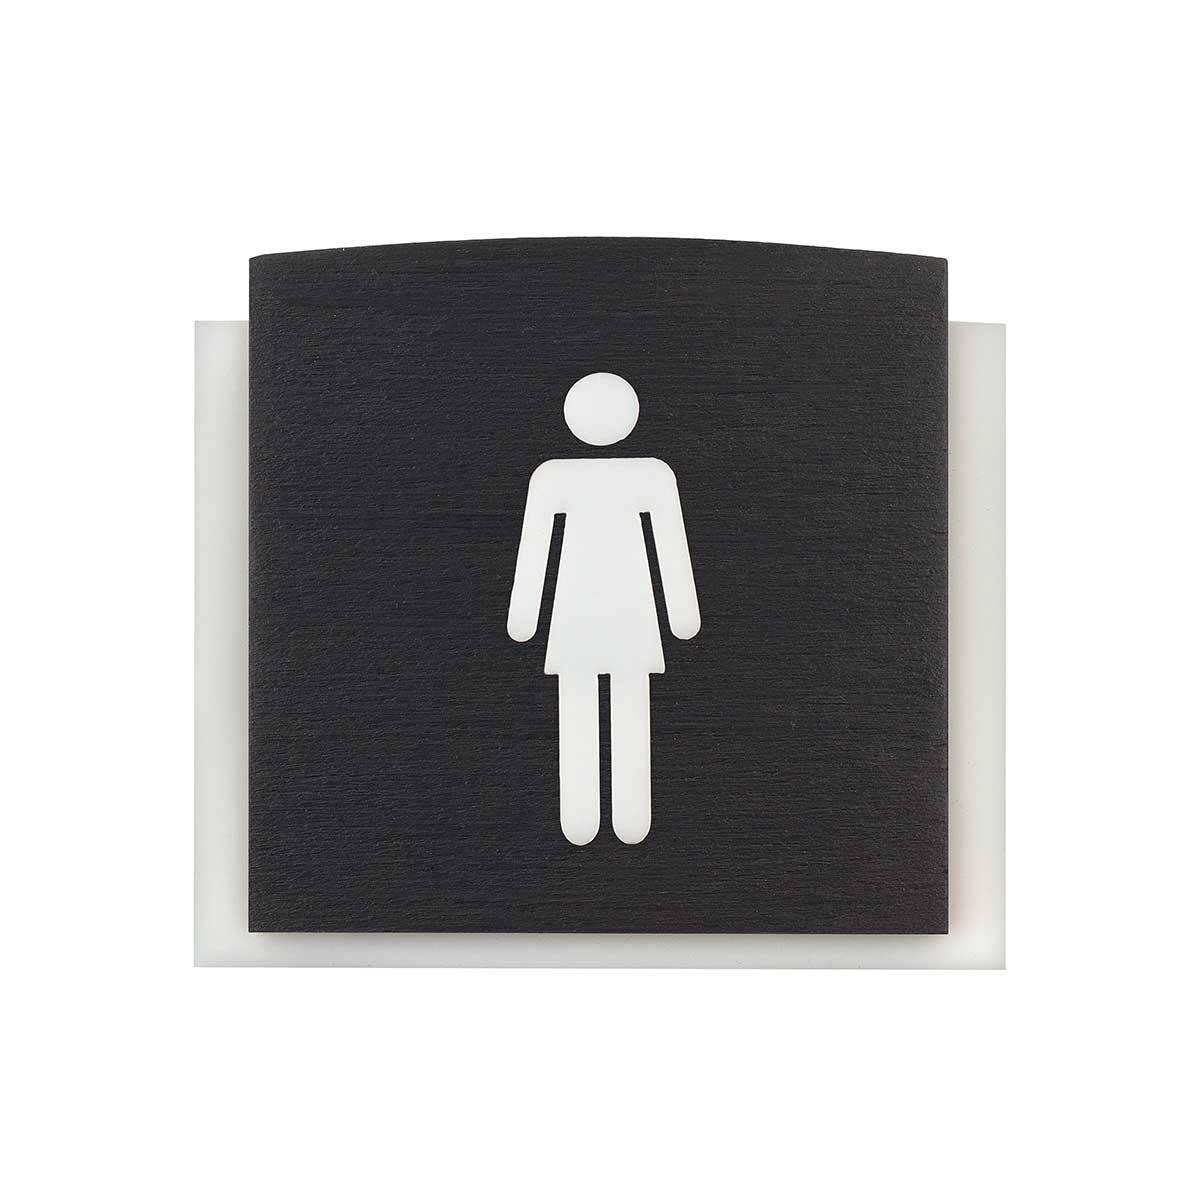 Wooden Restroom Signs for Woman Bathroom Signs Anthracite Gray Bsign